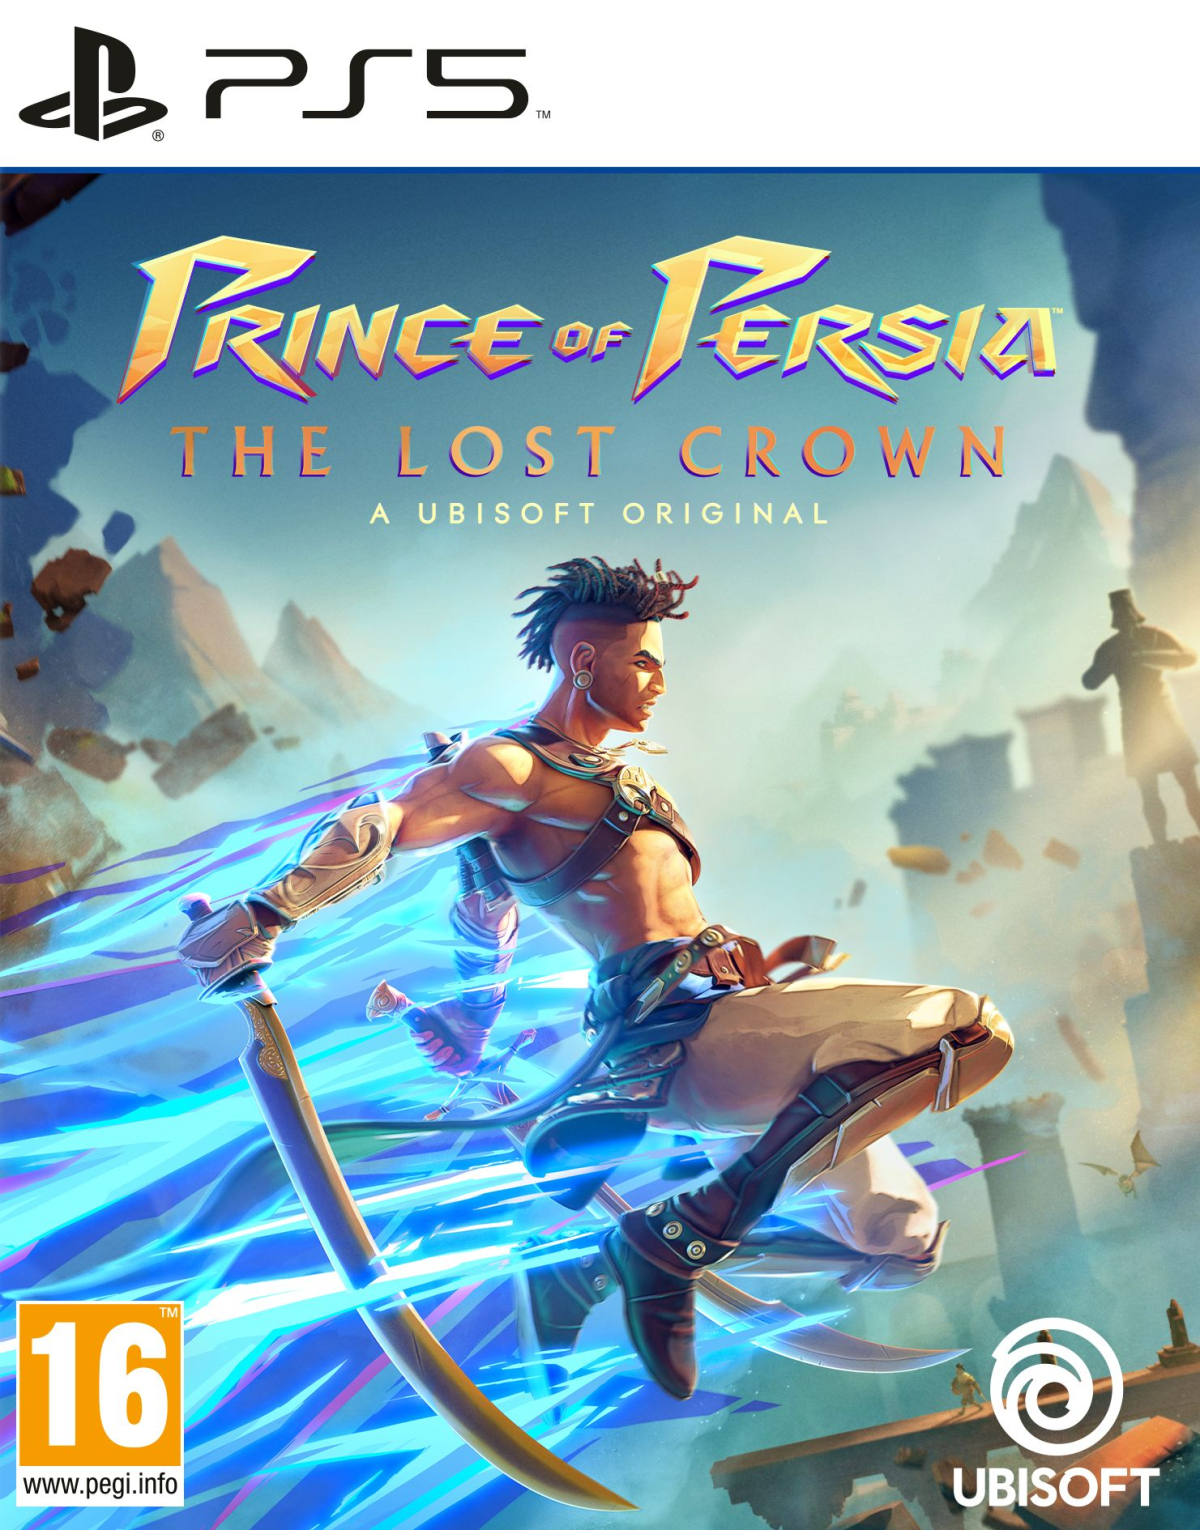 PS5 Prince of Persia The Lost Crown